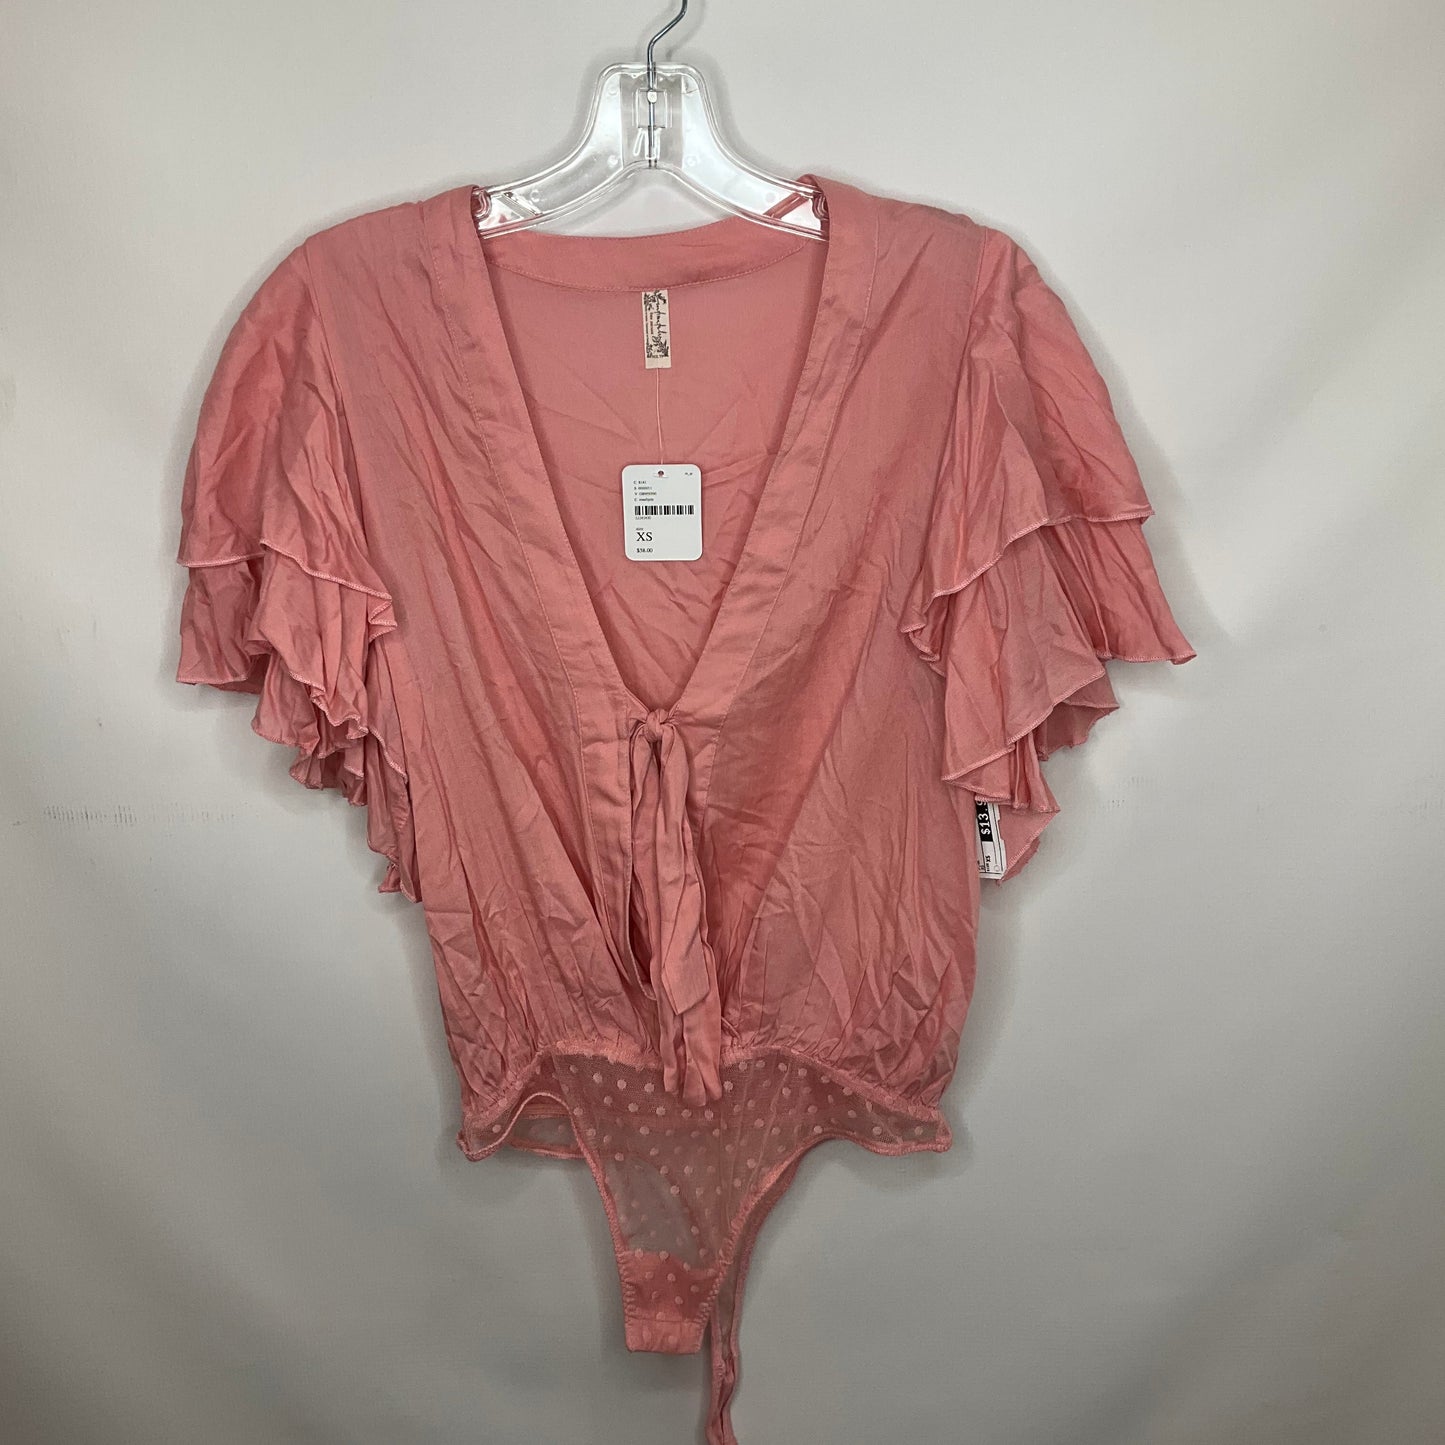 Pink Top short Sleeve Free People, Size Xs